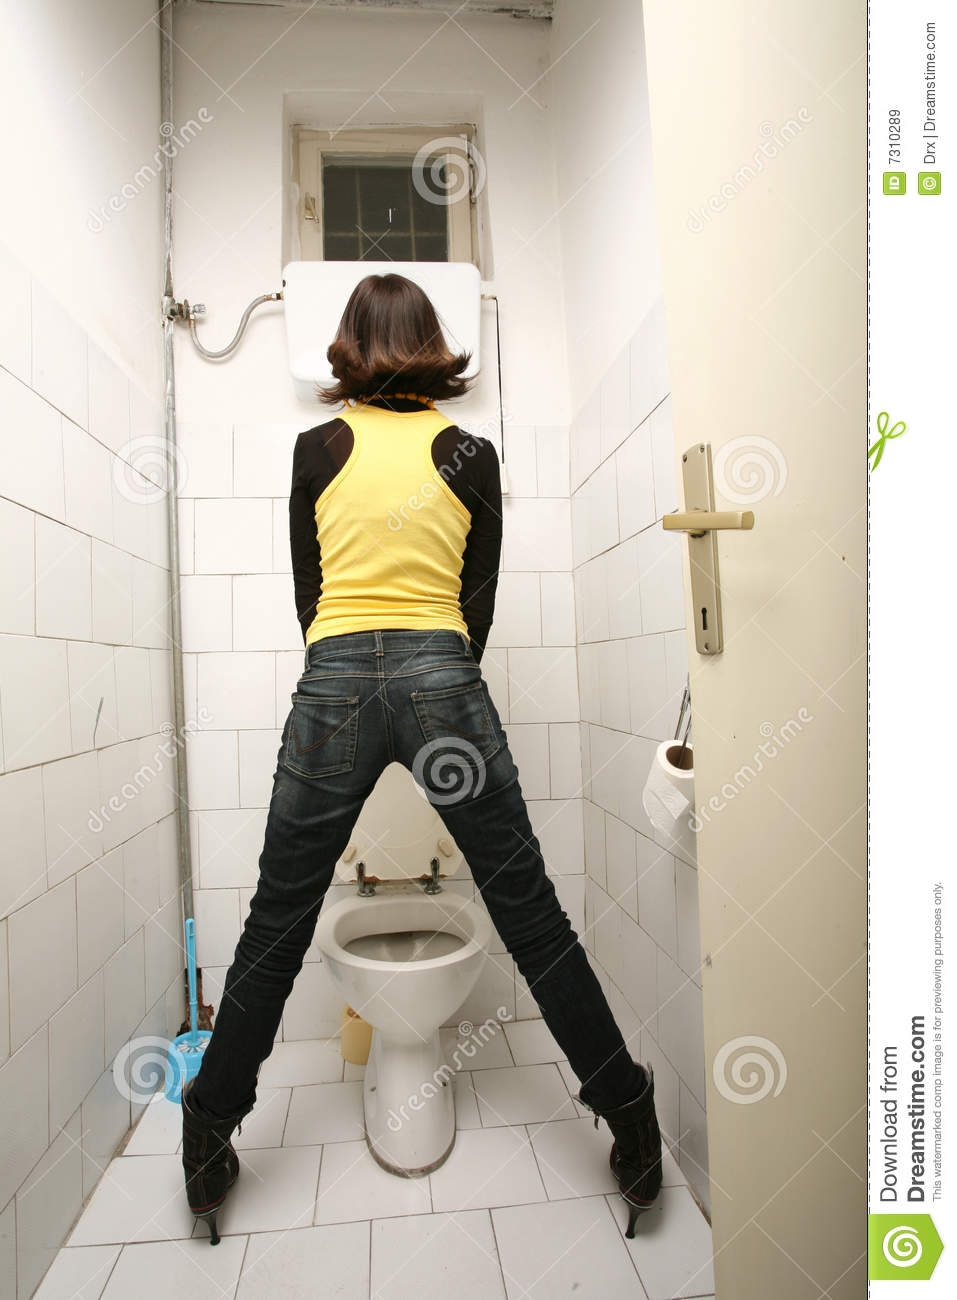 Standing and peeing on the floor